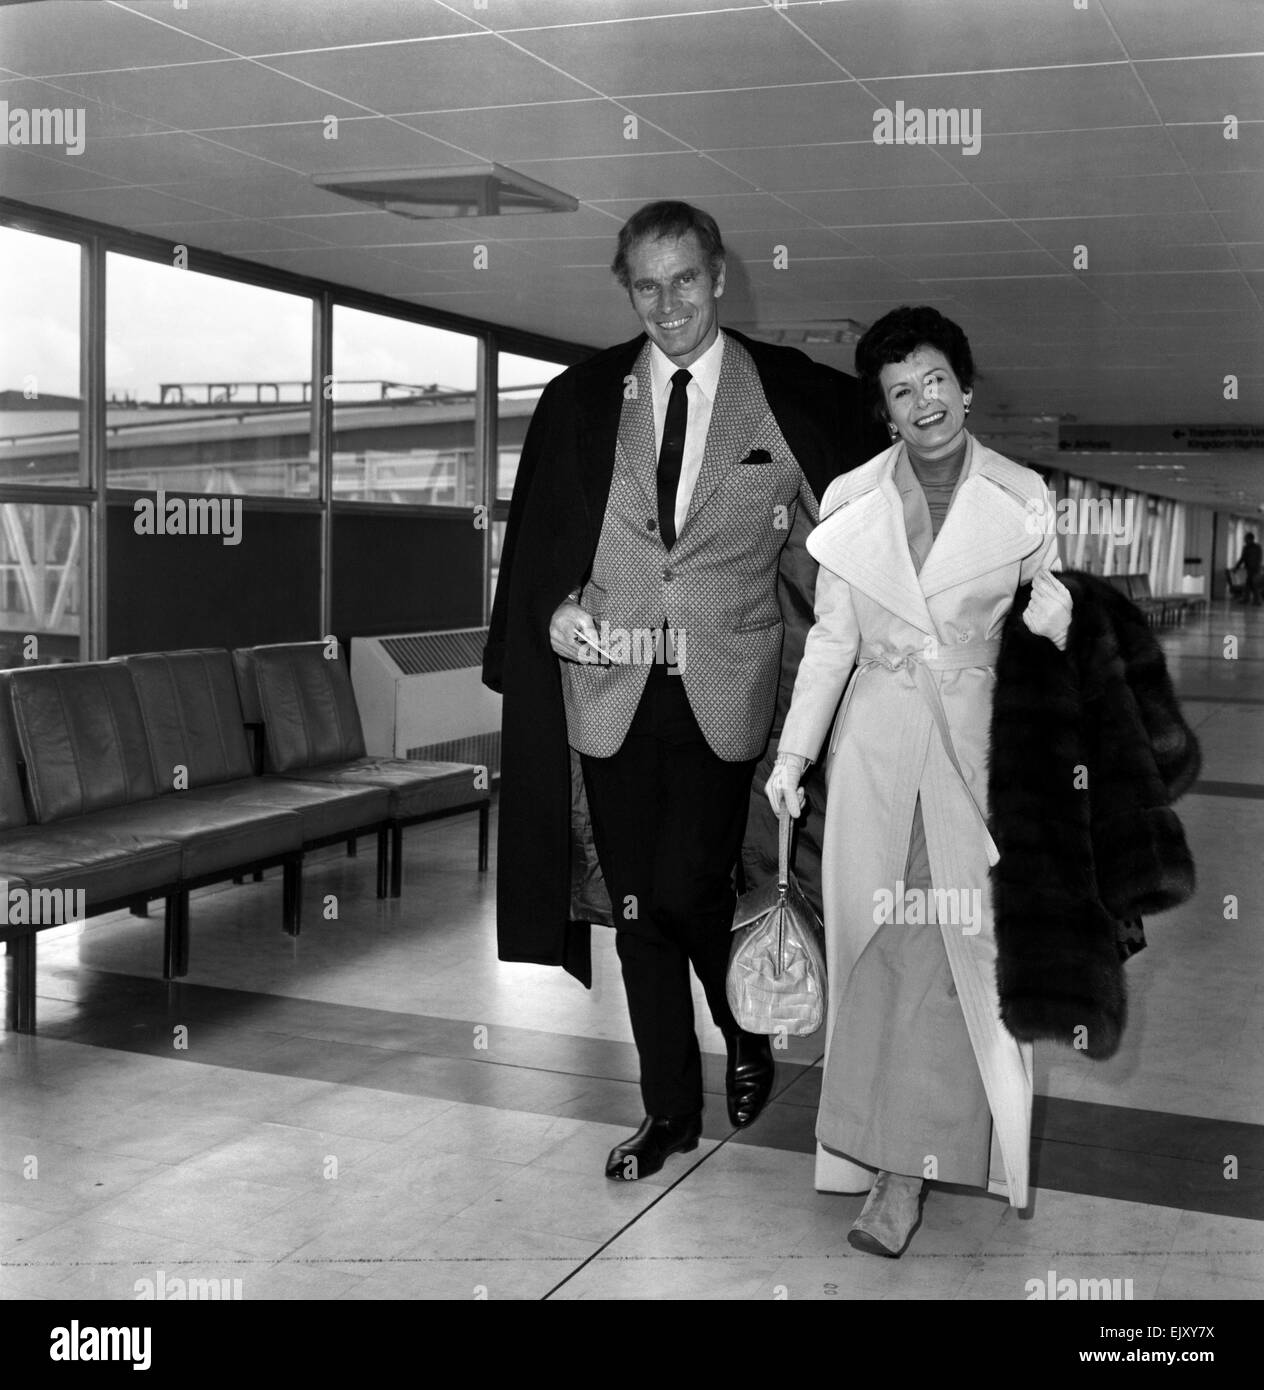 Charlton Heston, and his wife Lidia leaving London after attending the Premiere of his film 'Anthony and Cleopatra'. Now they are on their way to Japan for the film's premiere over there. March 1972 72-2084-001 Stock Photo